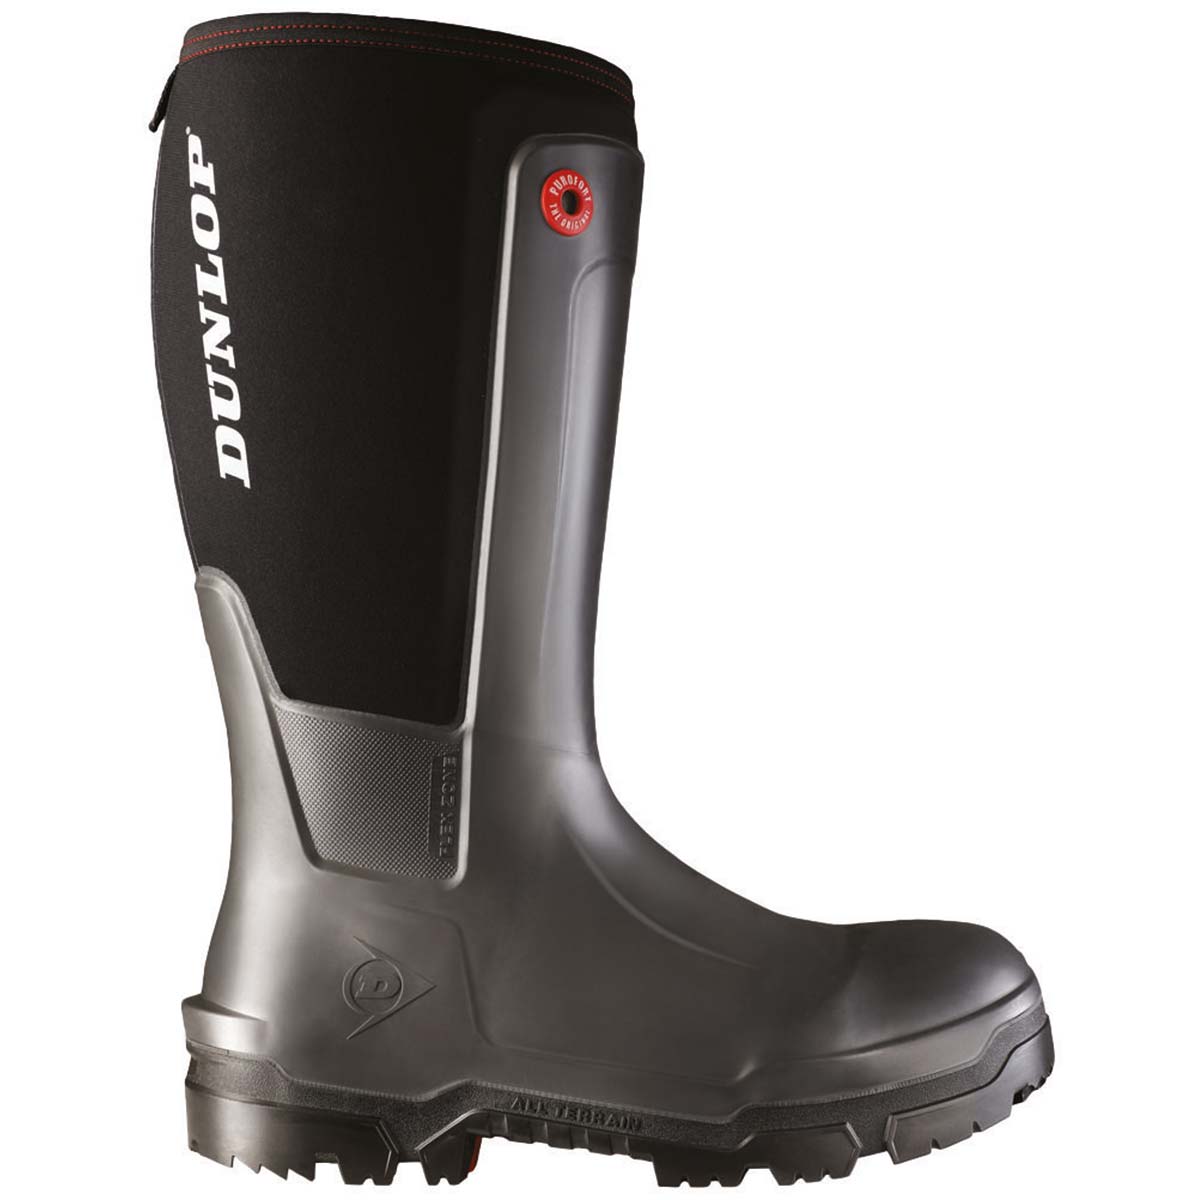 Cizme protecție Dunlop Snugboot WorkPro Full Safety